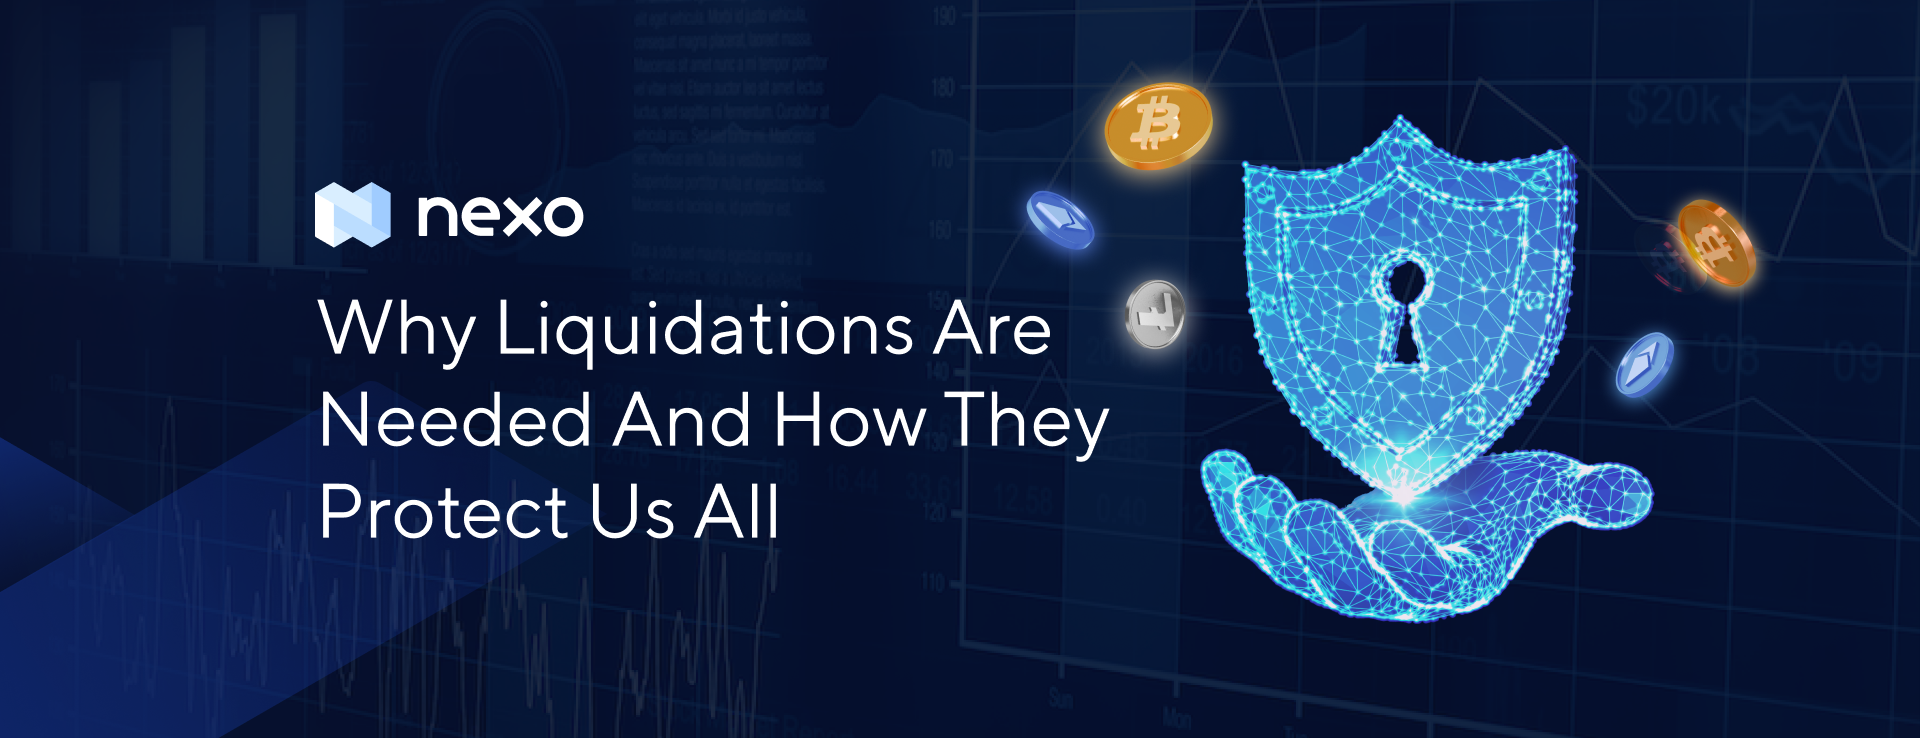 Why Liquidations Are Needed and How They Protect Us All